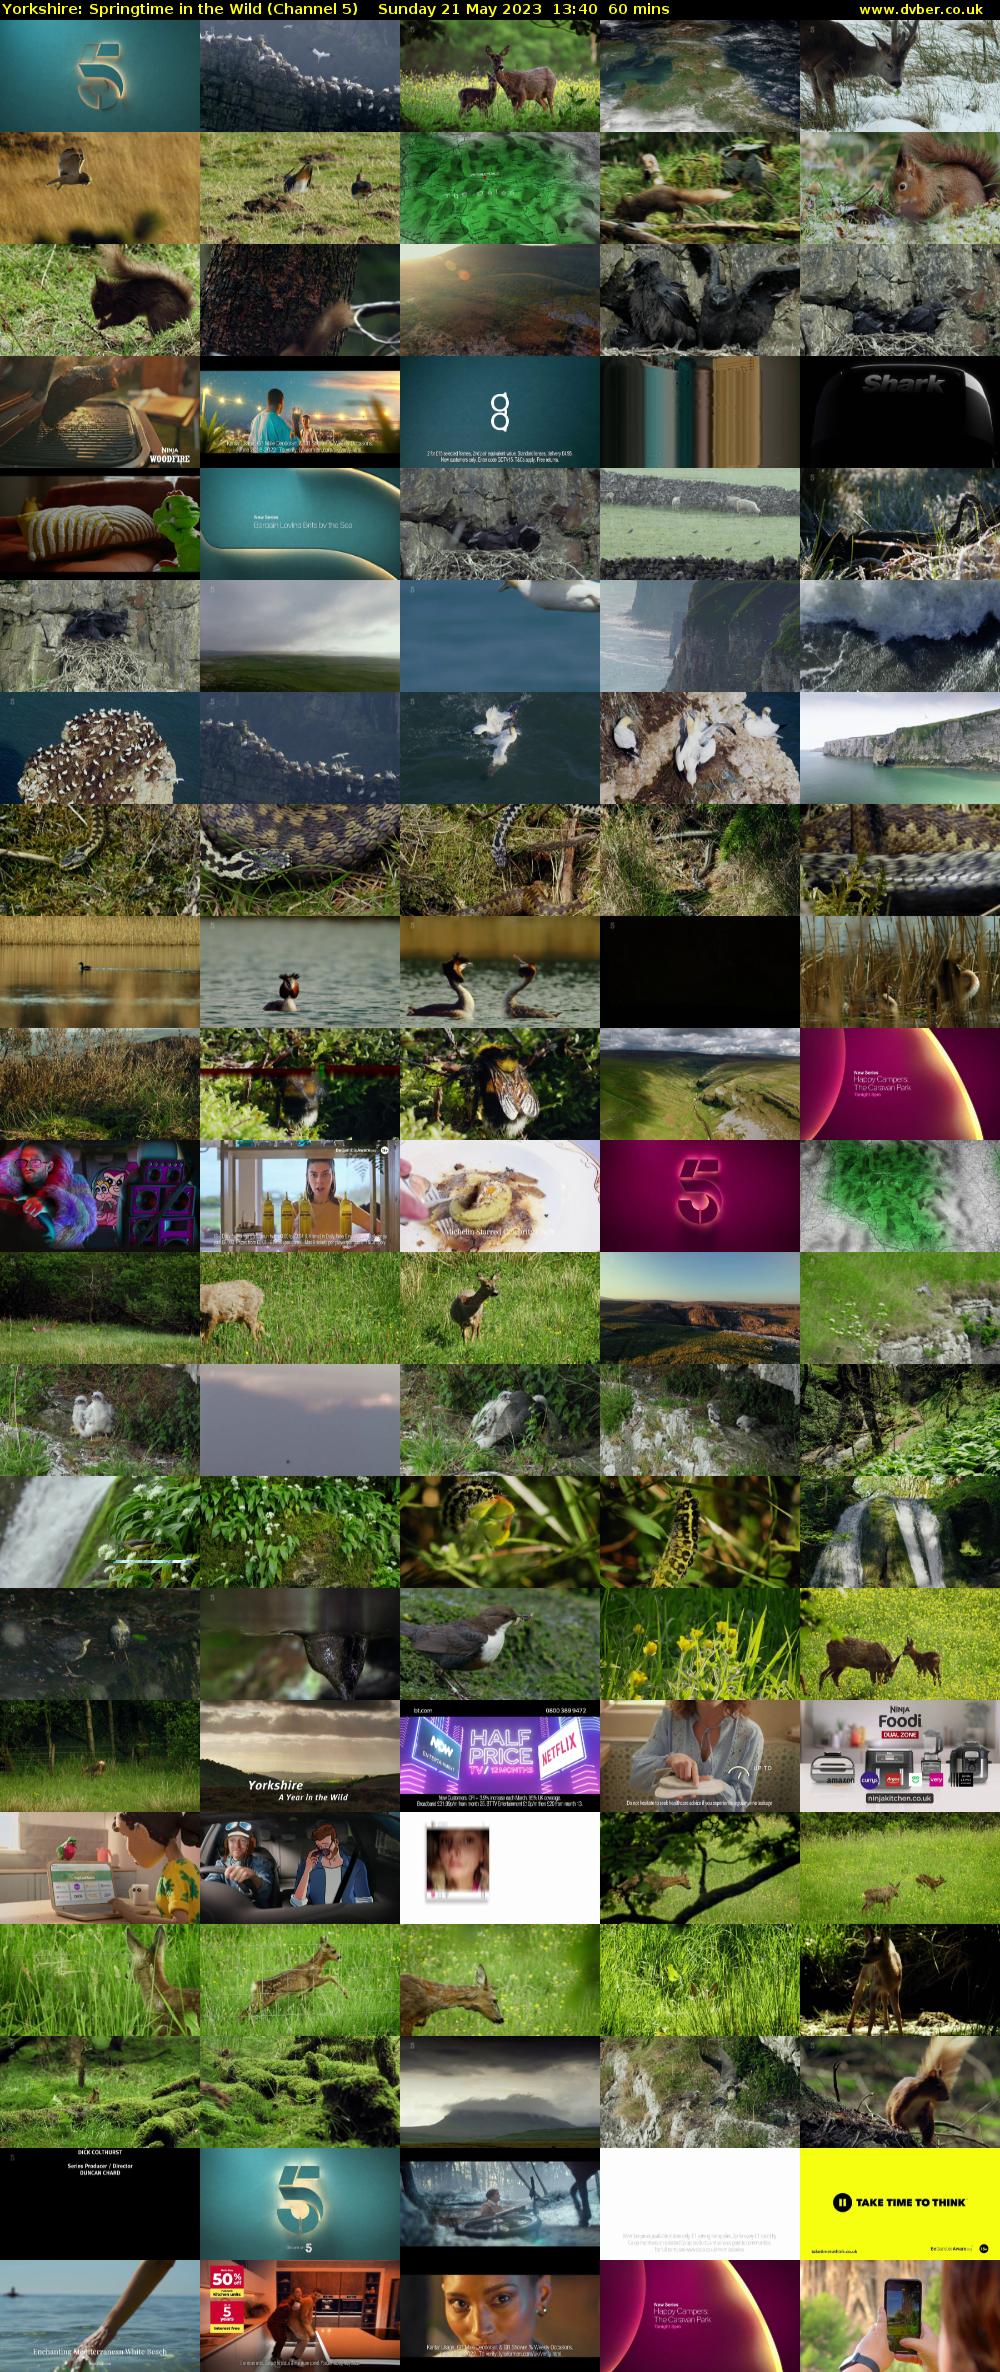 Yorkshire: Springtime in the Wild (Channel 5) Sunday 21 May 2023 13:40 - 14:40